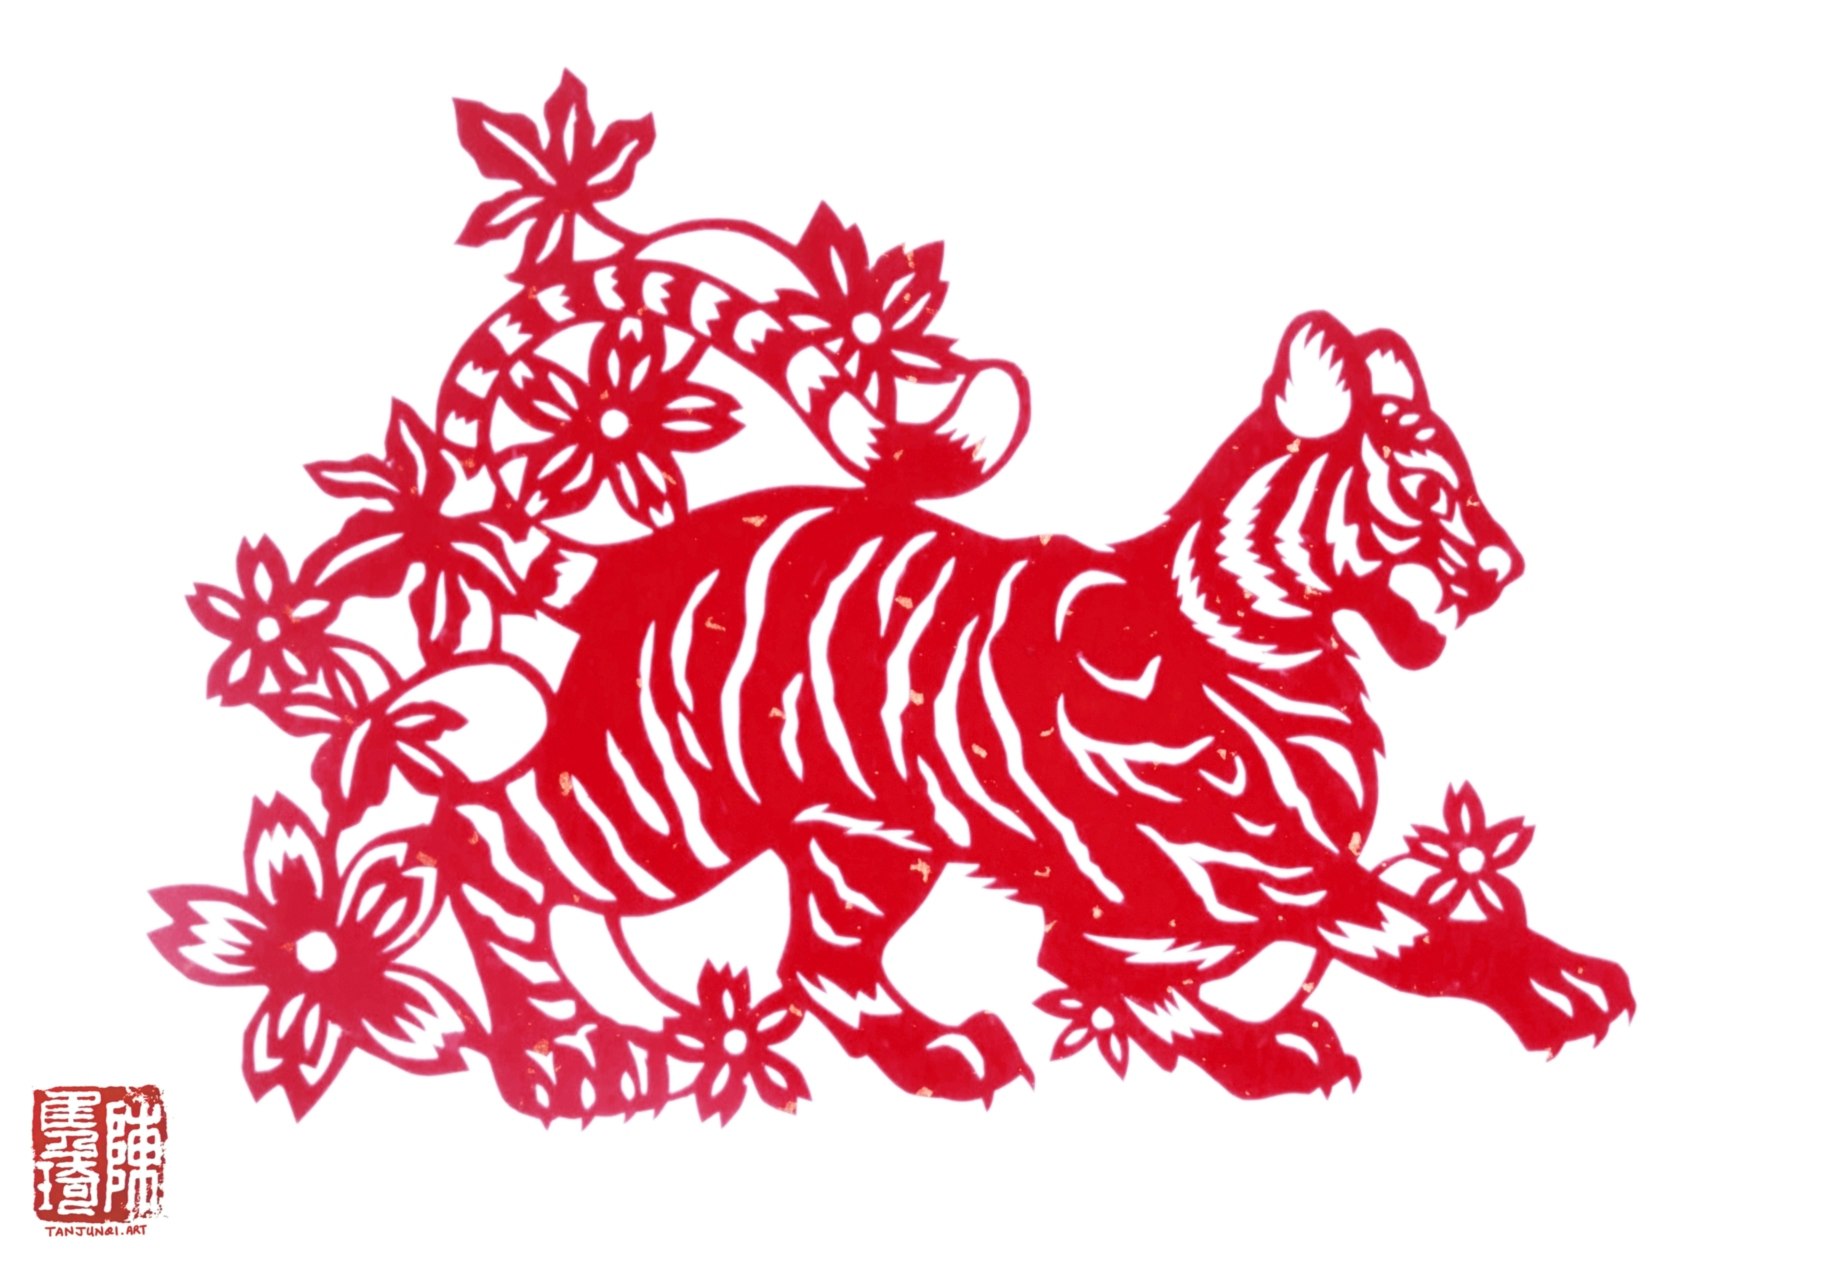 Chinese papercut of a tiger walking forward amidst blooming flowers